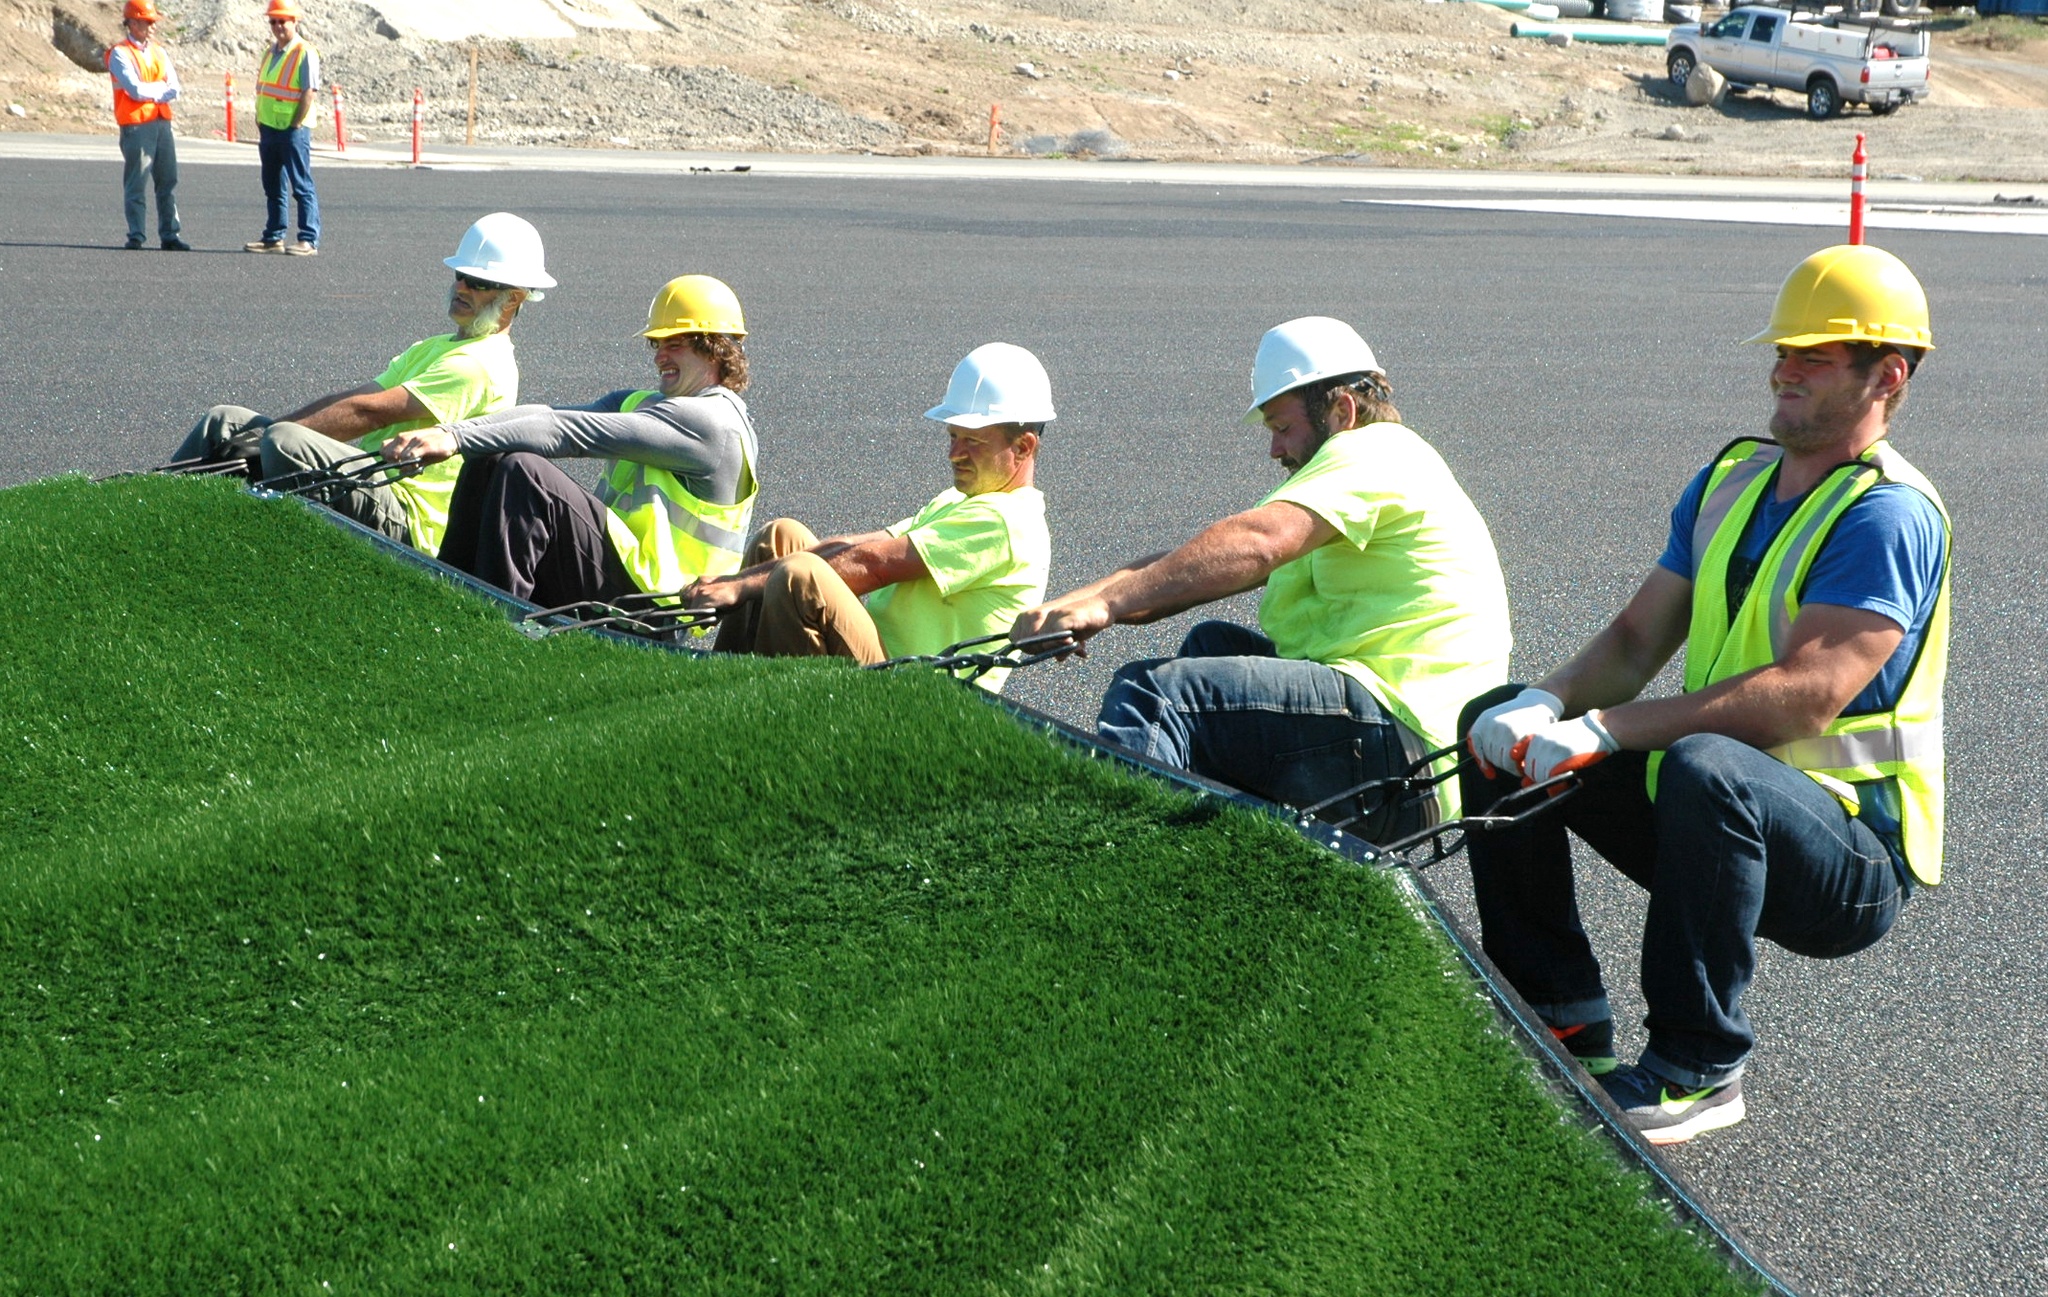 Kirk Boxleitner/Staff PhotoConstruction crews put down segments of artificial turf for Lakewood High School’s new field.